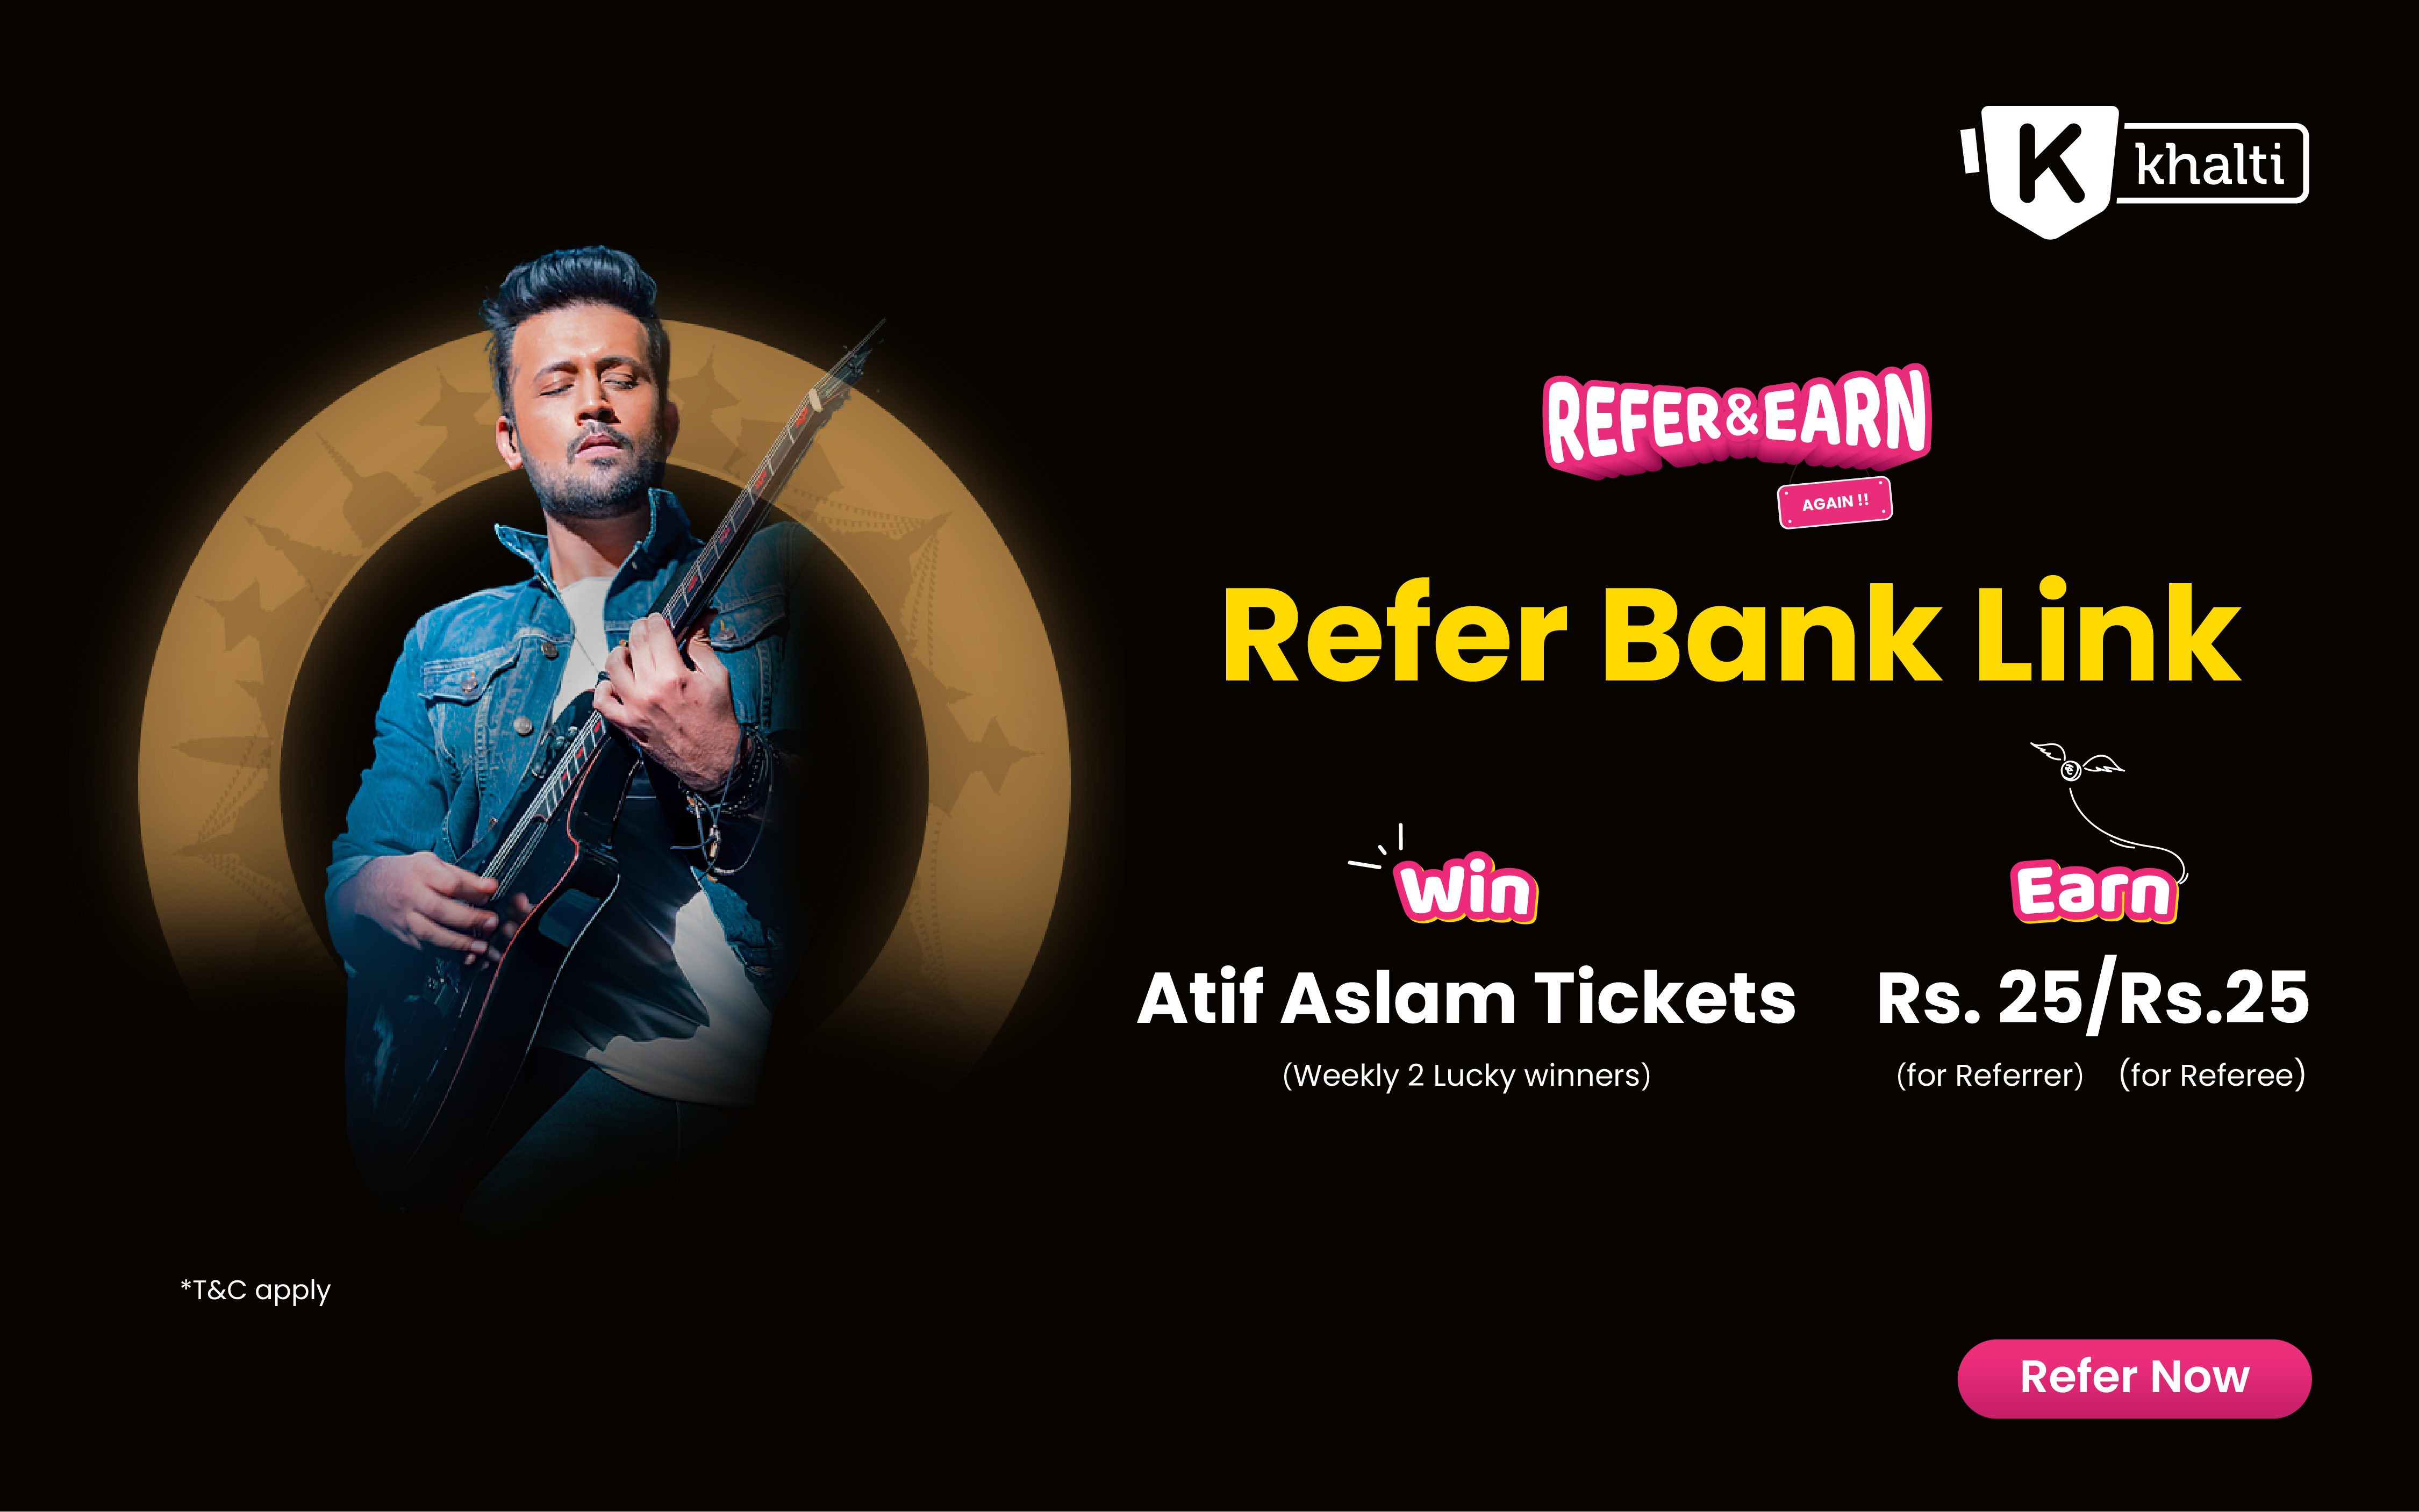 Refer Bank Link and Earn:  Tickets to Atif Aslam